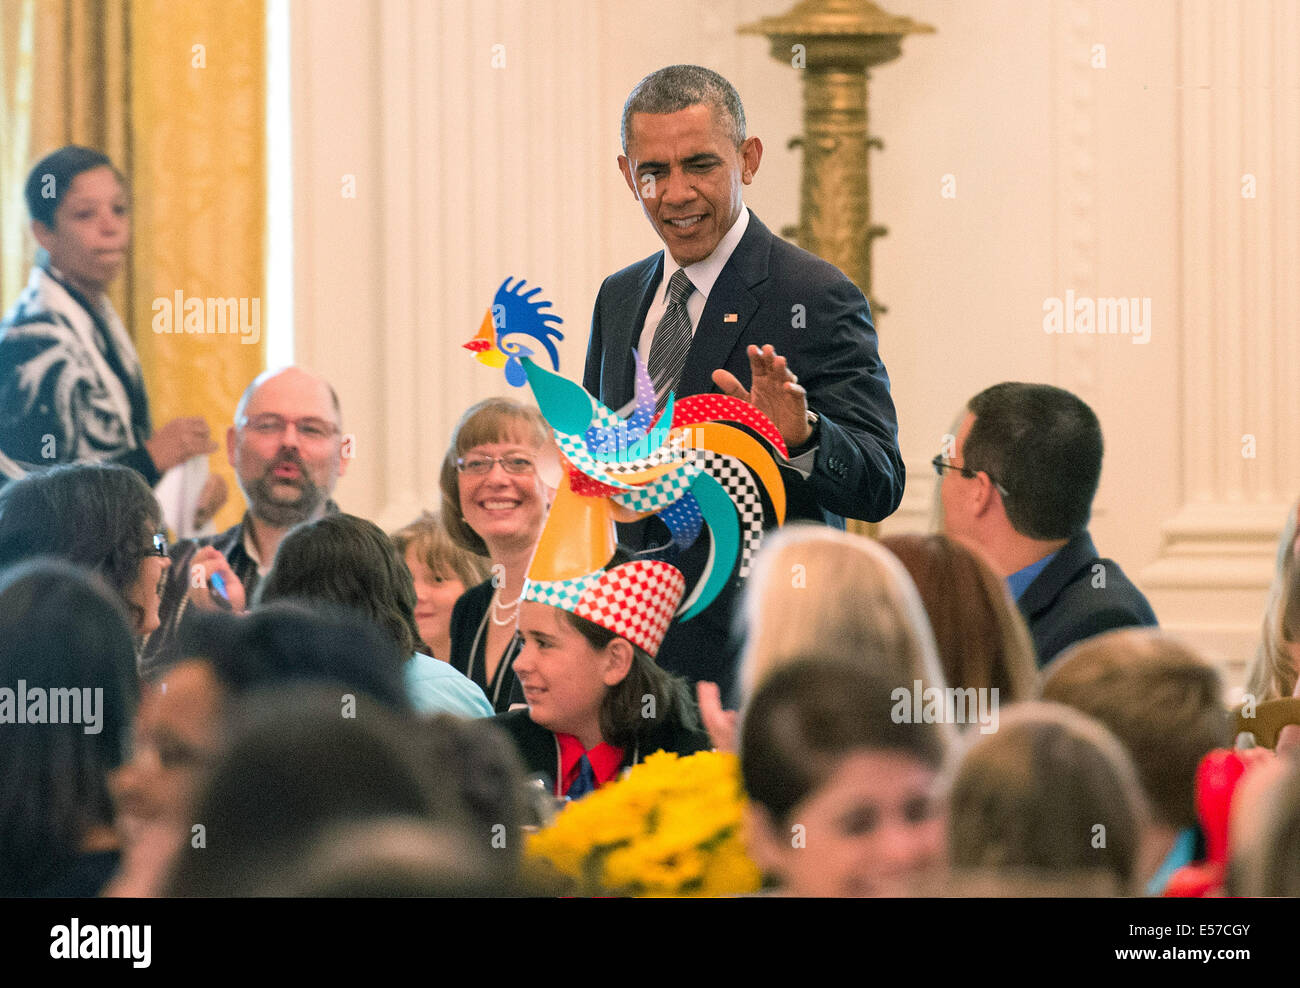 United States President Barack Obama looks at a child's hat as he arrives at the Kids' State Dinner in the East Room at the White House on July 18, 2014 in Washington, DC Credit: Kevin Dietsch/Pool via CNP Stock Photo